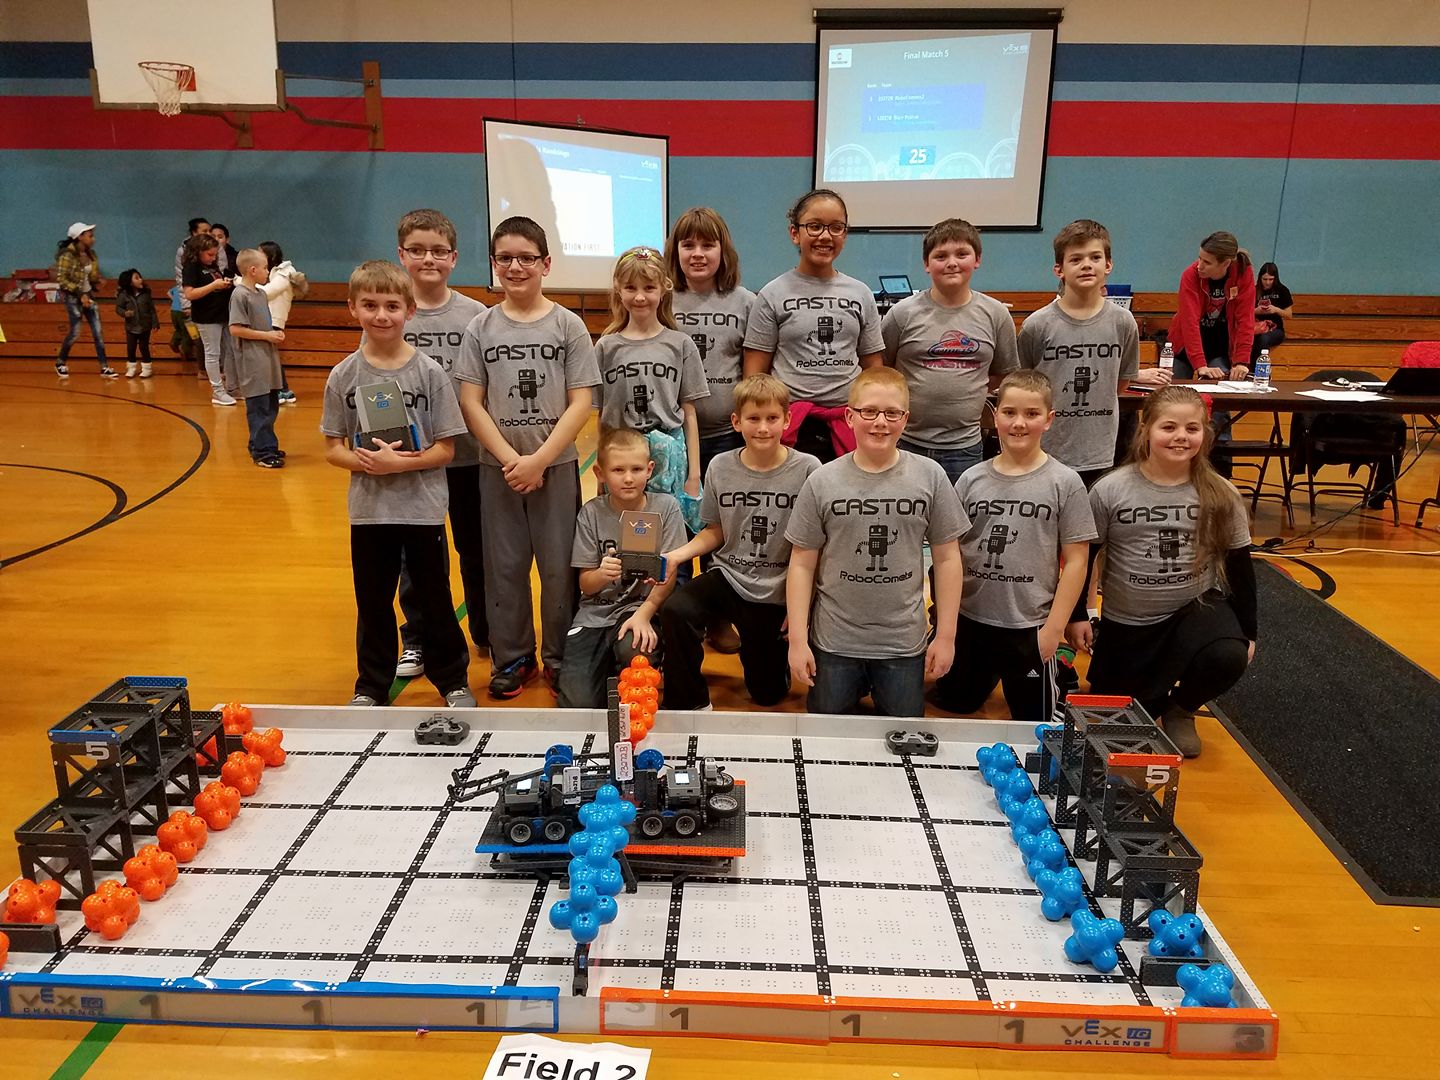 Thumbnail for the post titled: Caston Robocomets qualify for state competition